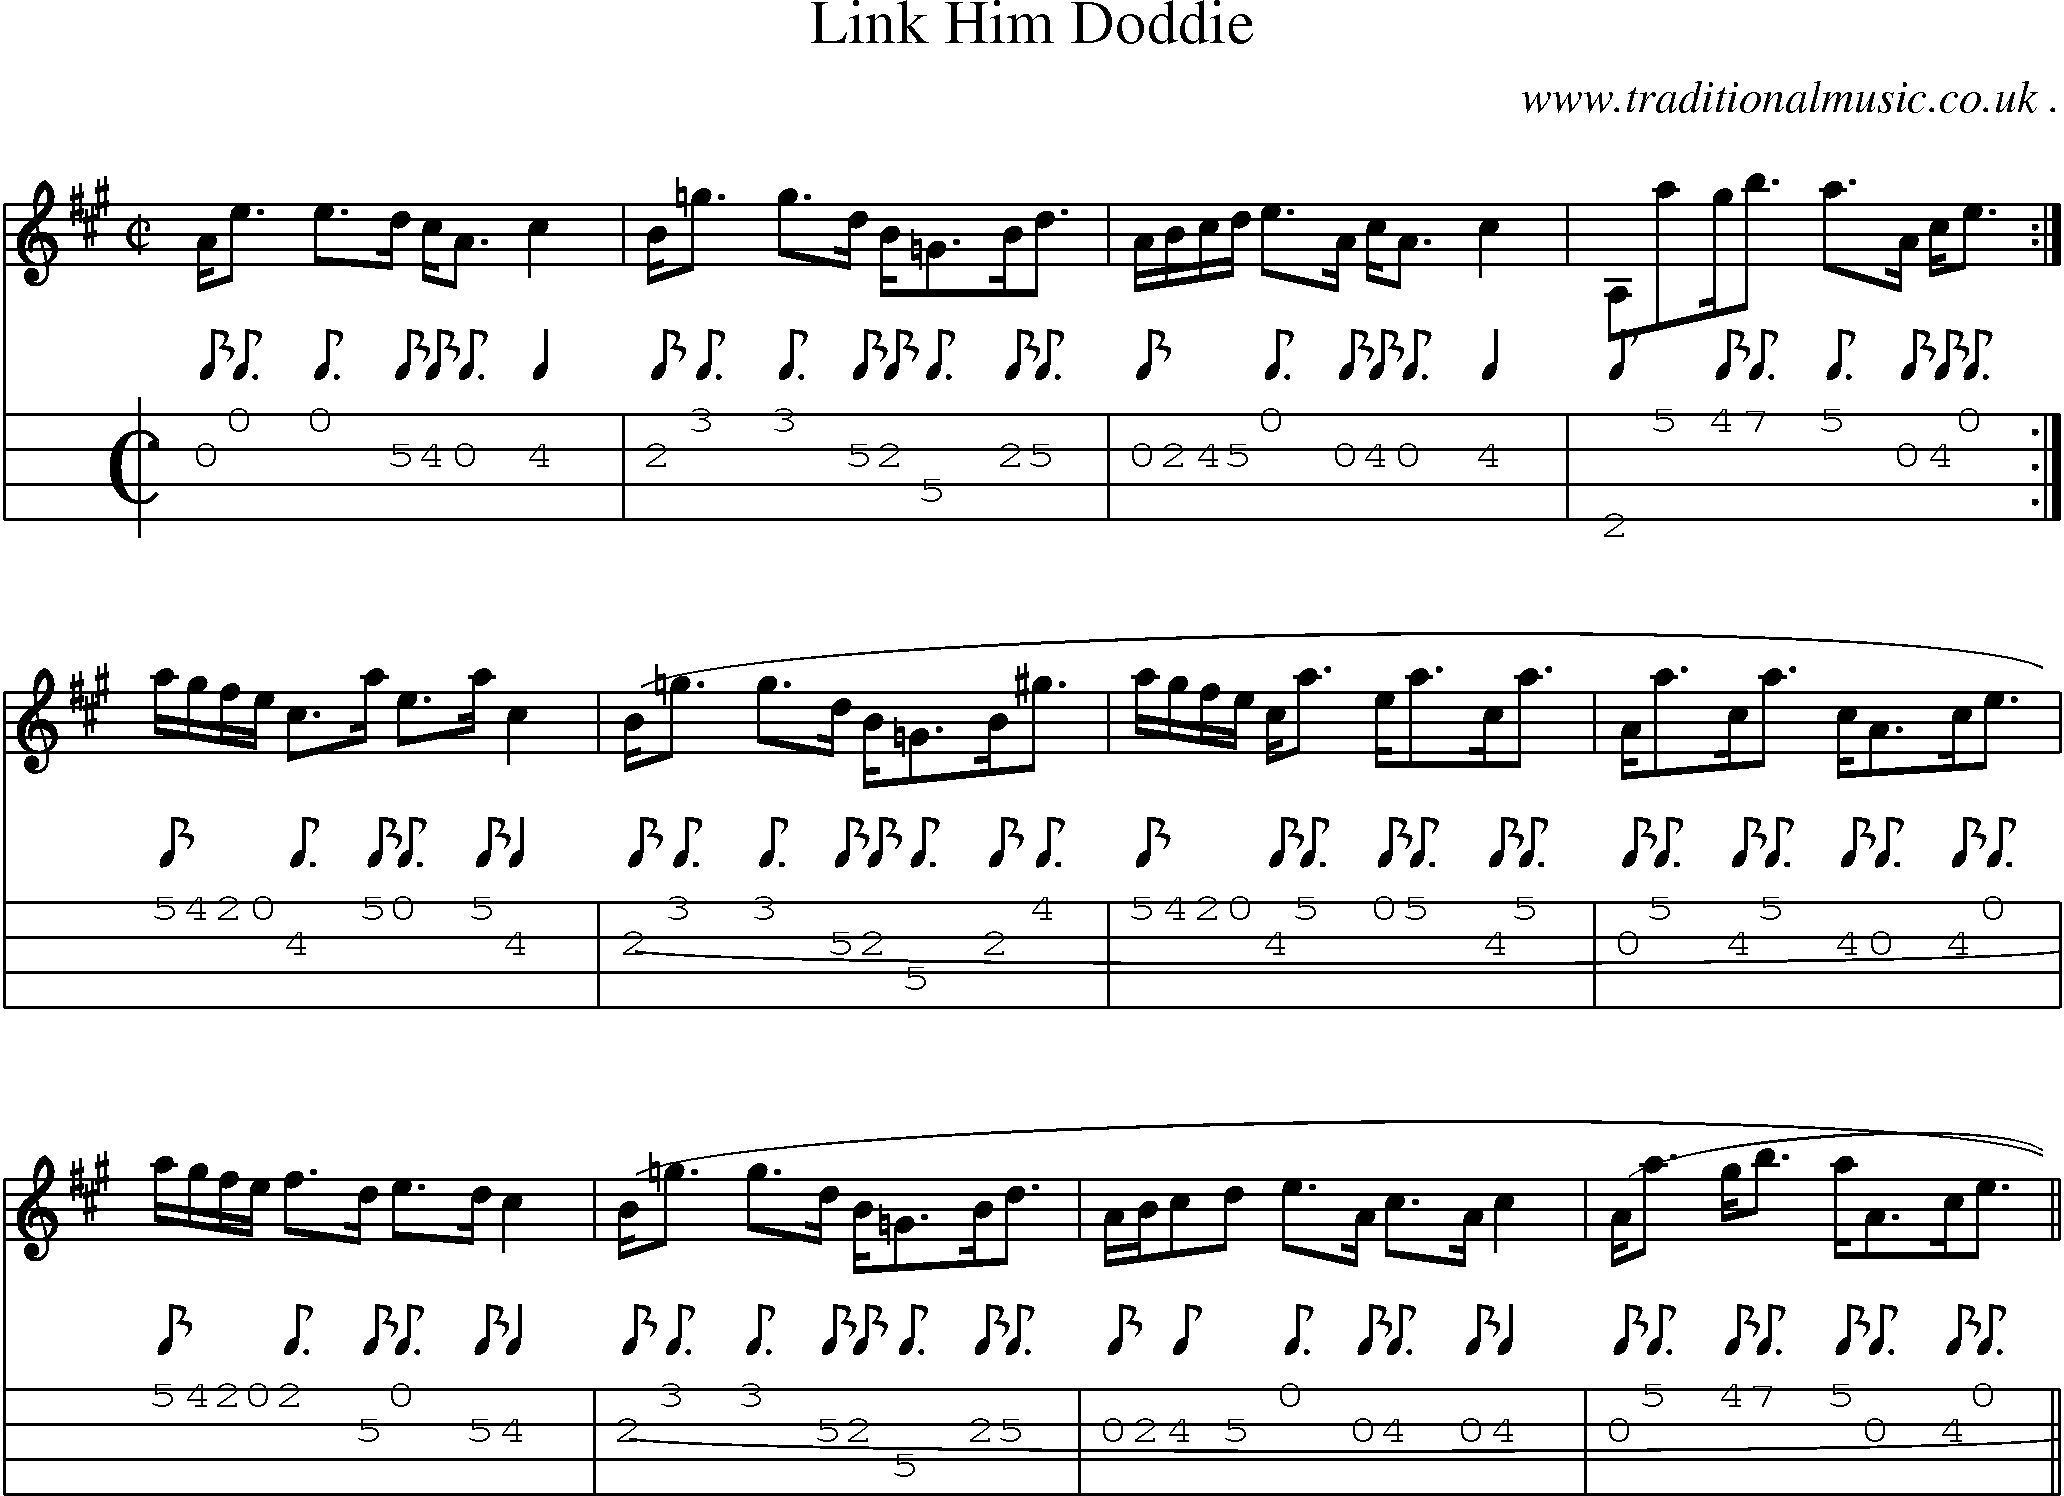 Sheet-music  score, Chords and Mandolin Tabs for Link Him Doddie